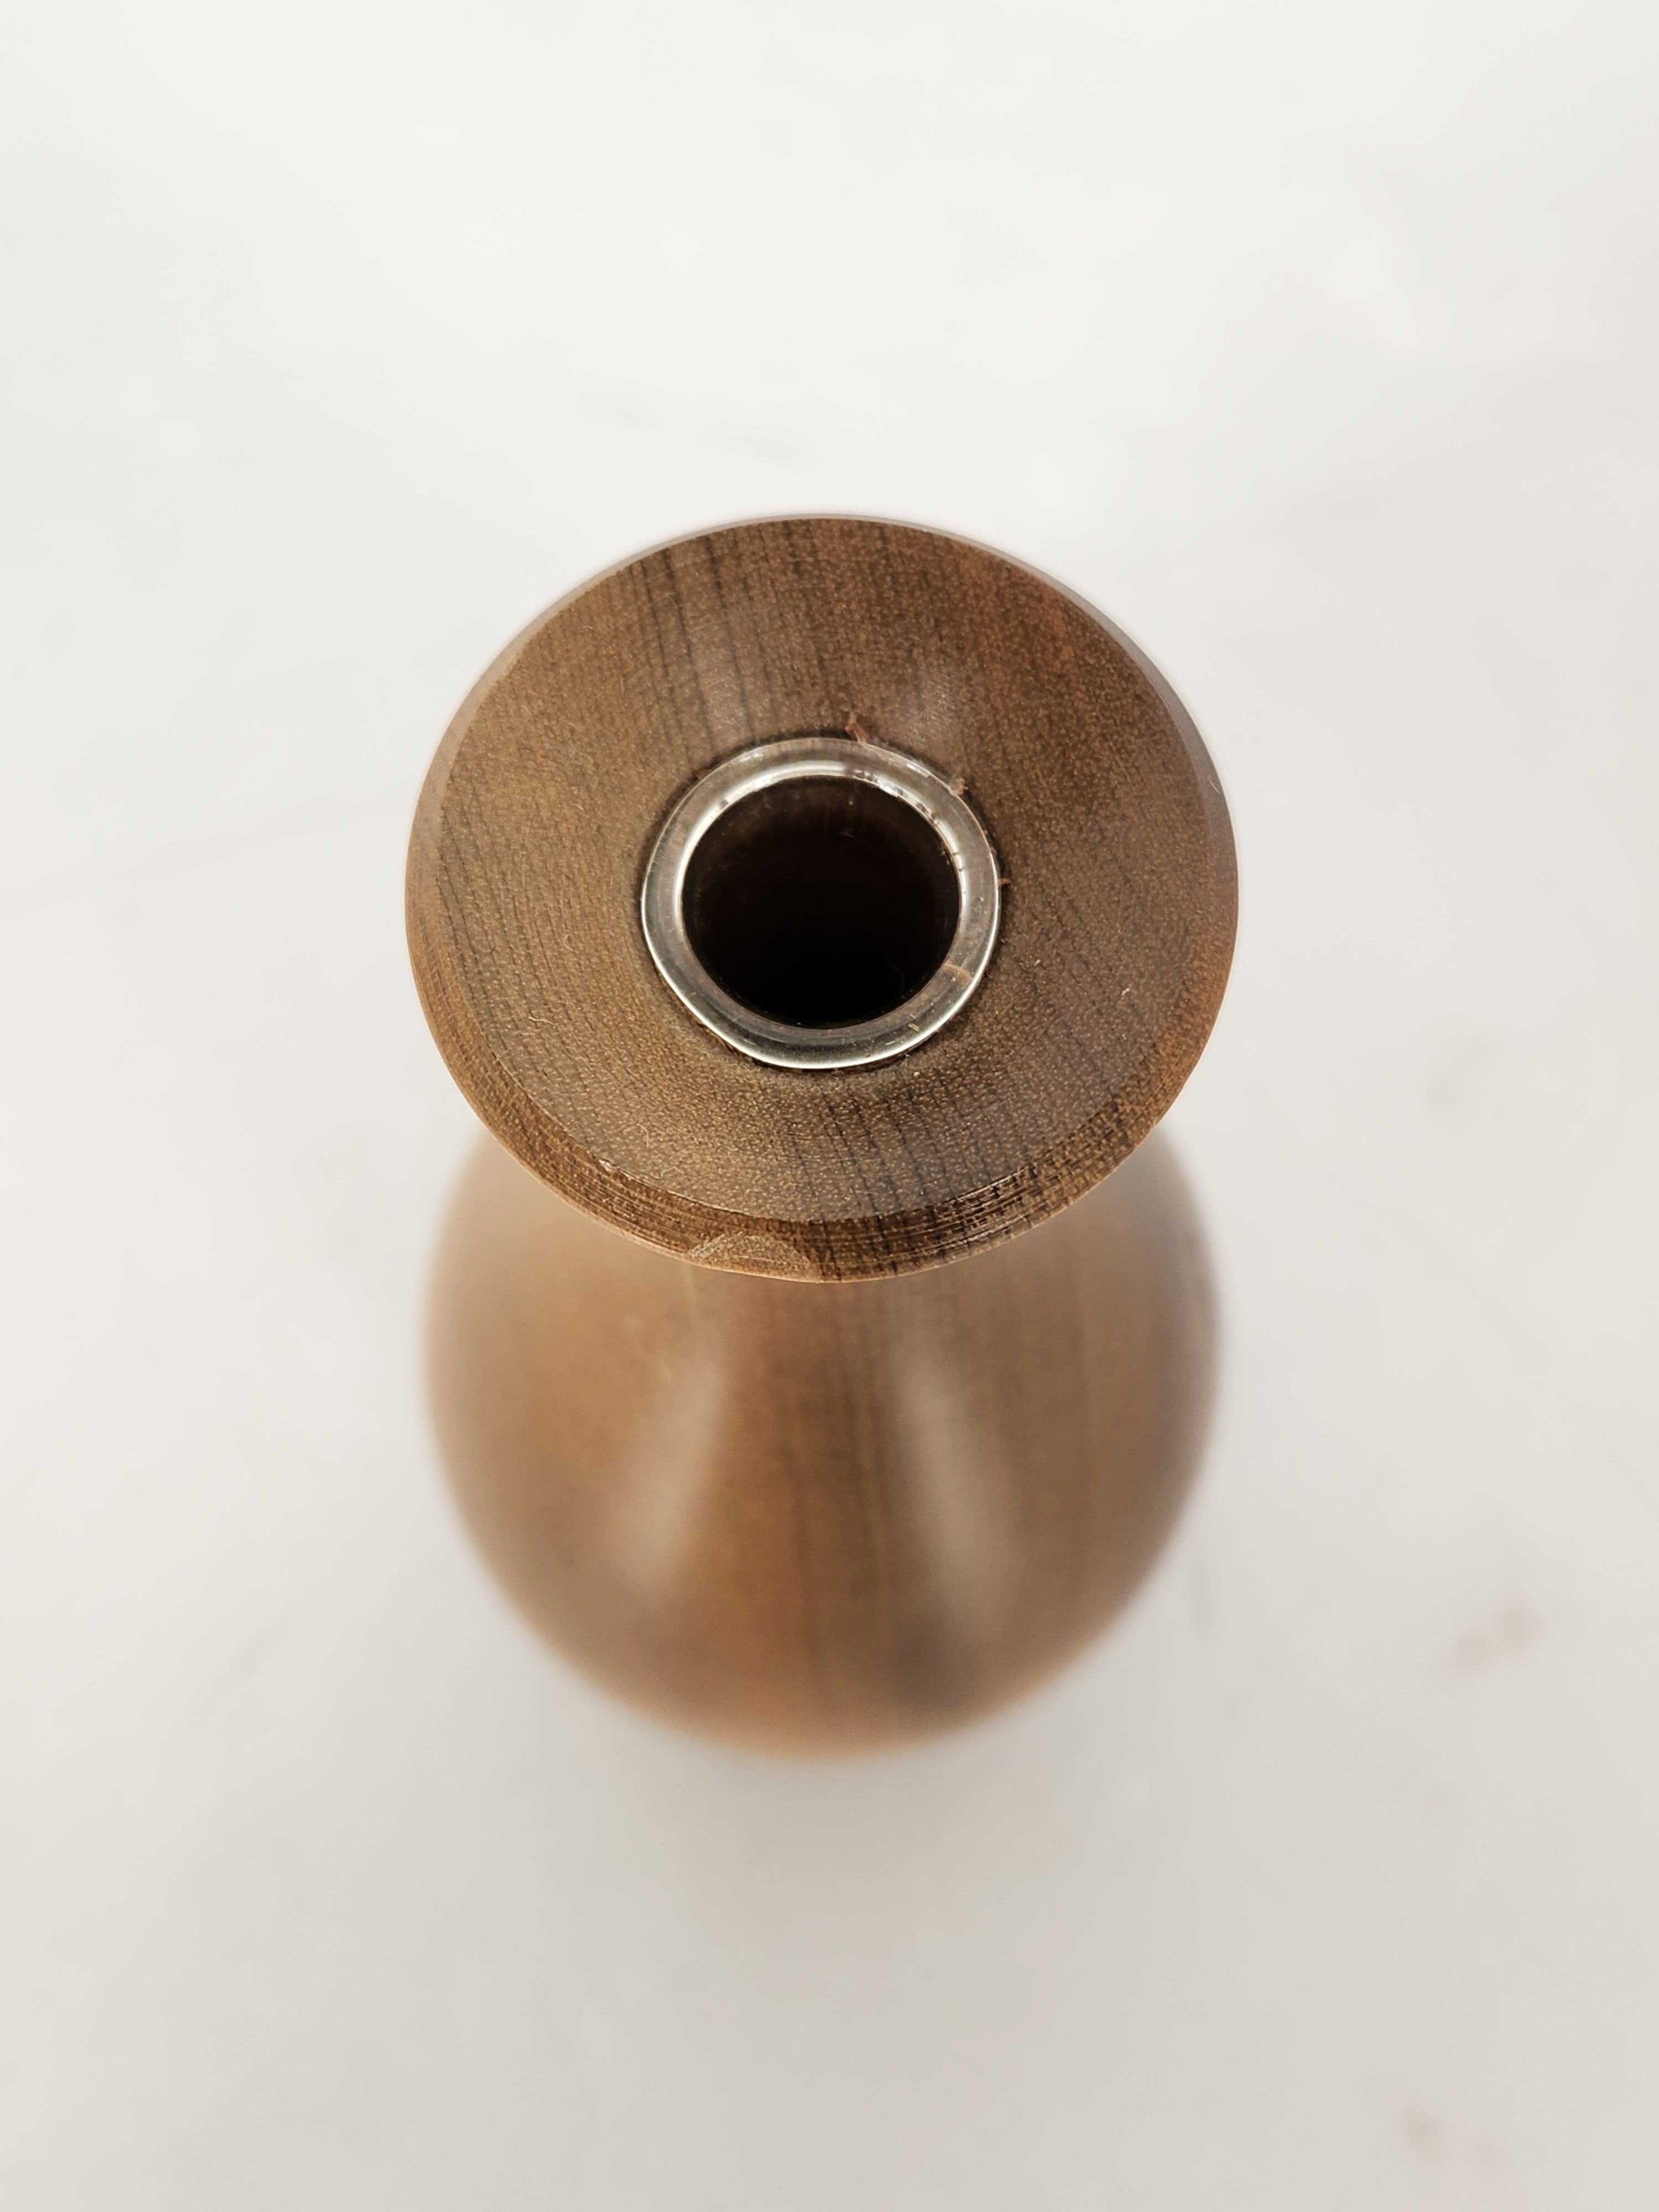 Small Wooden Vase